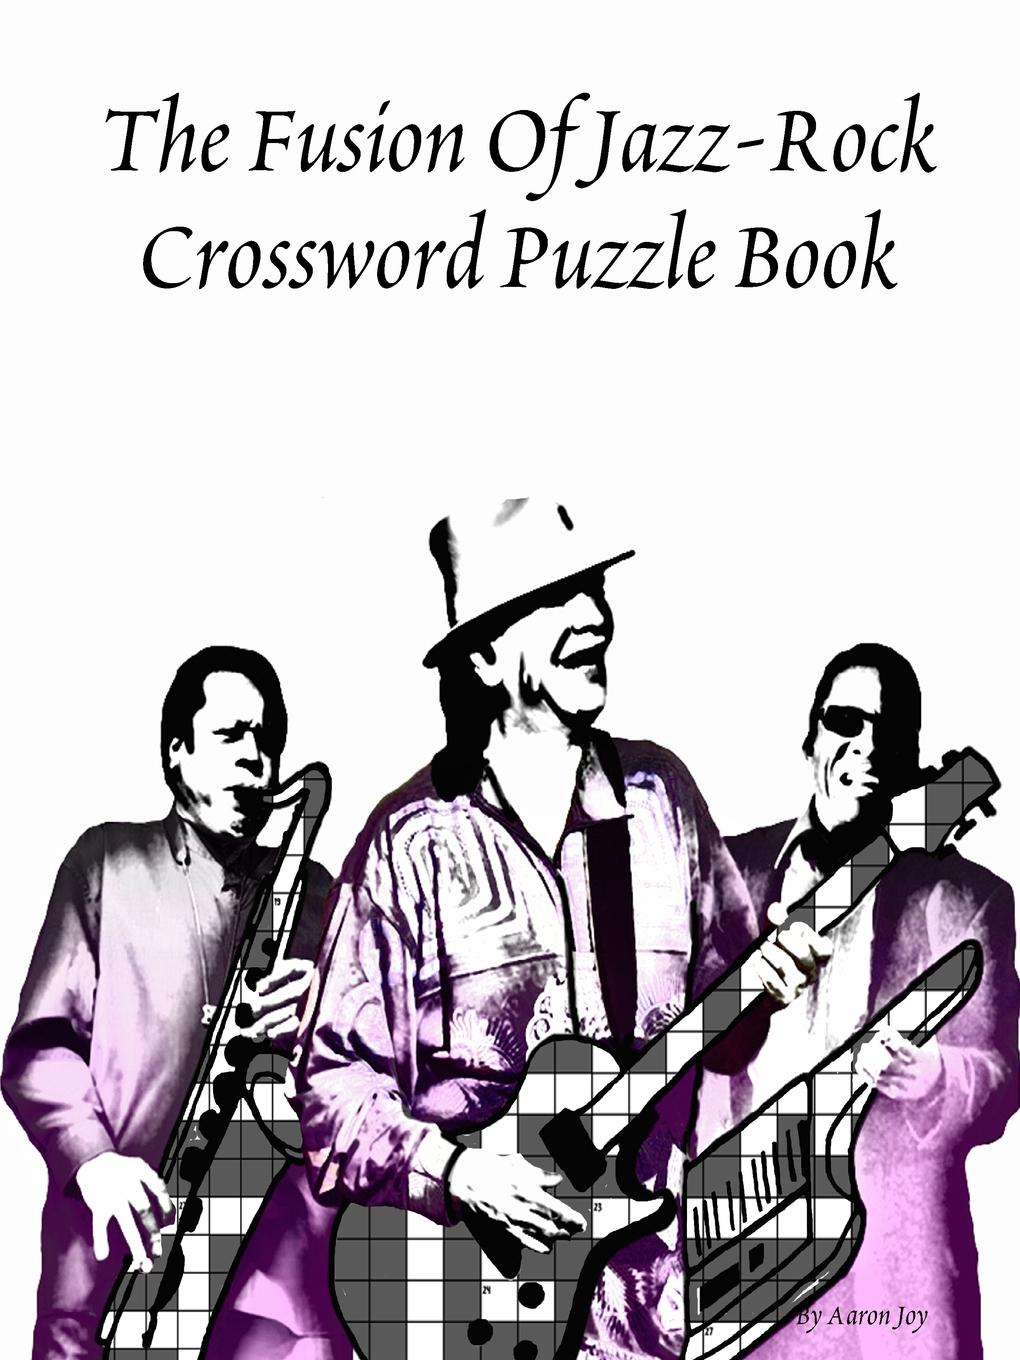 The Fusion Of Jazz-Rock Crossword Puzzle Book